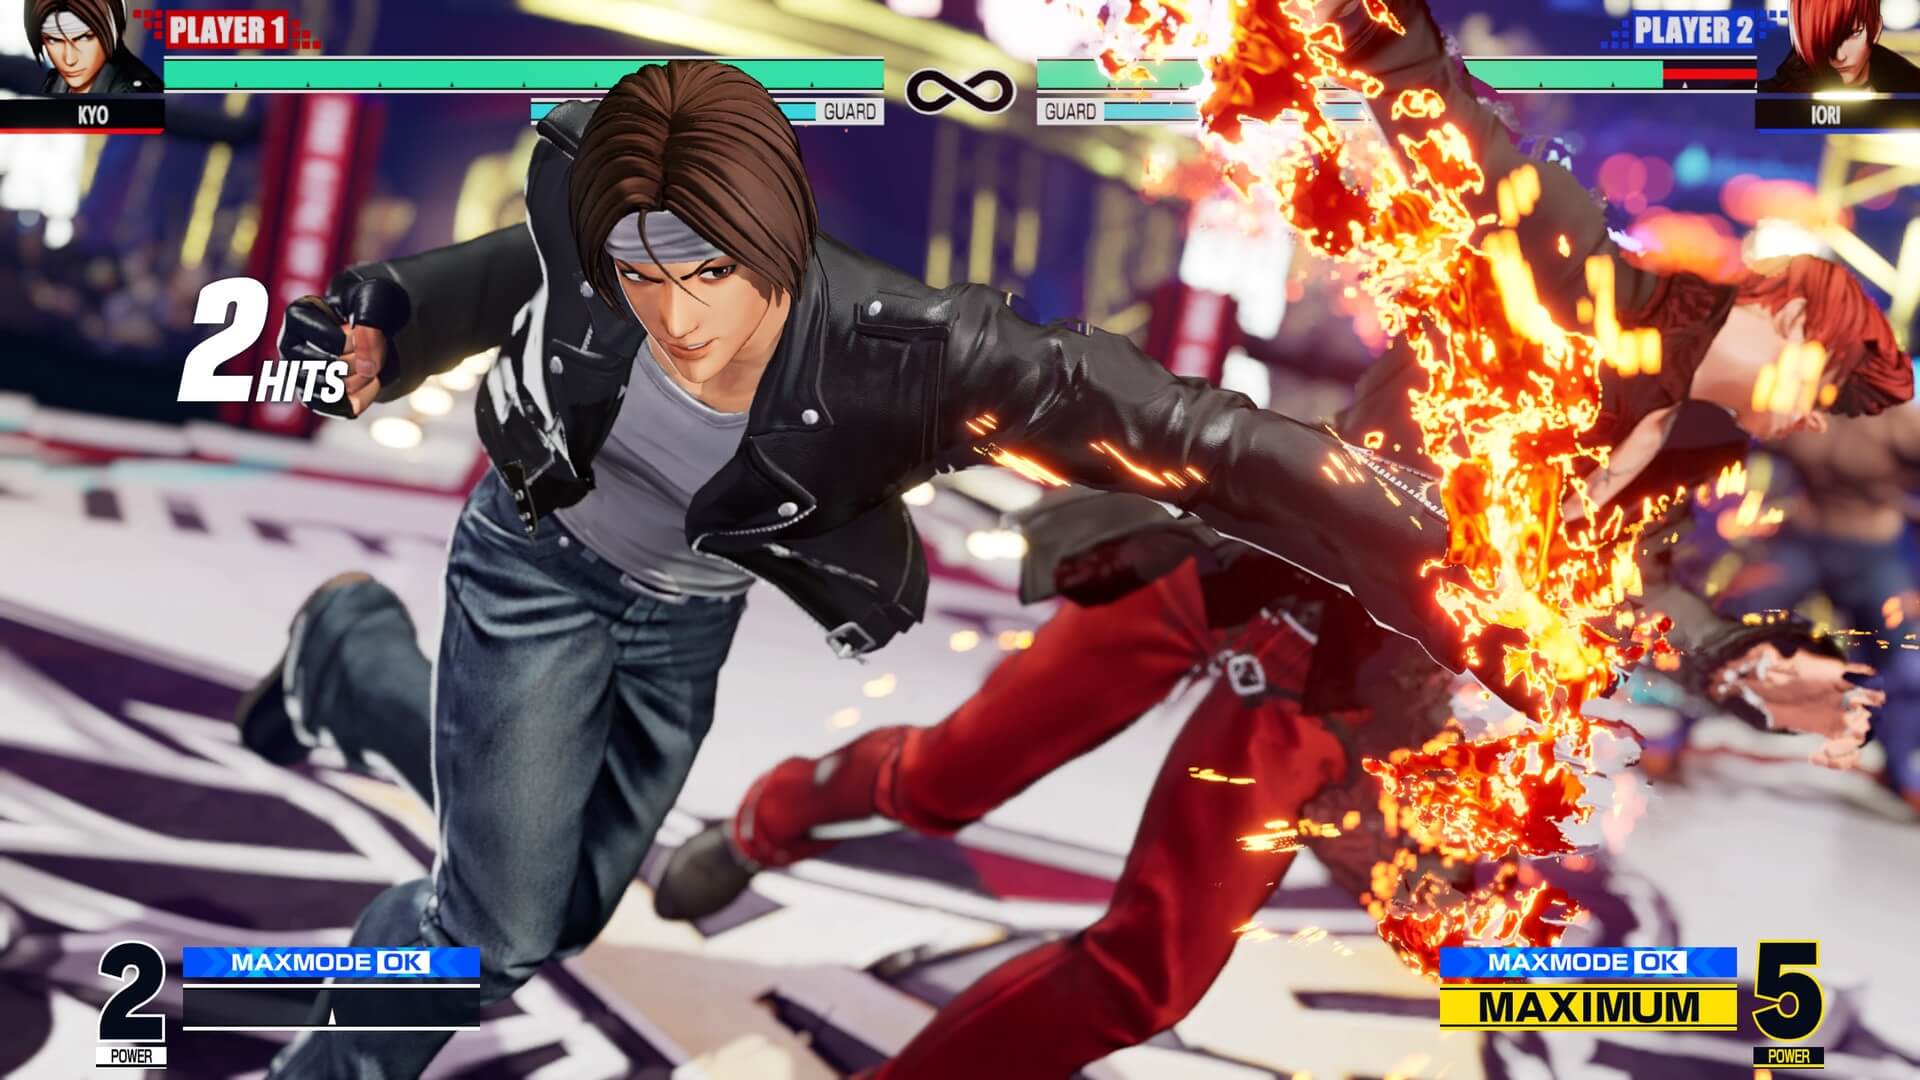 Kyo and Iori fighting it out in King of Fighters XV